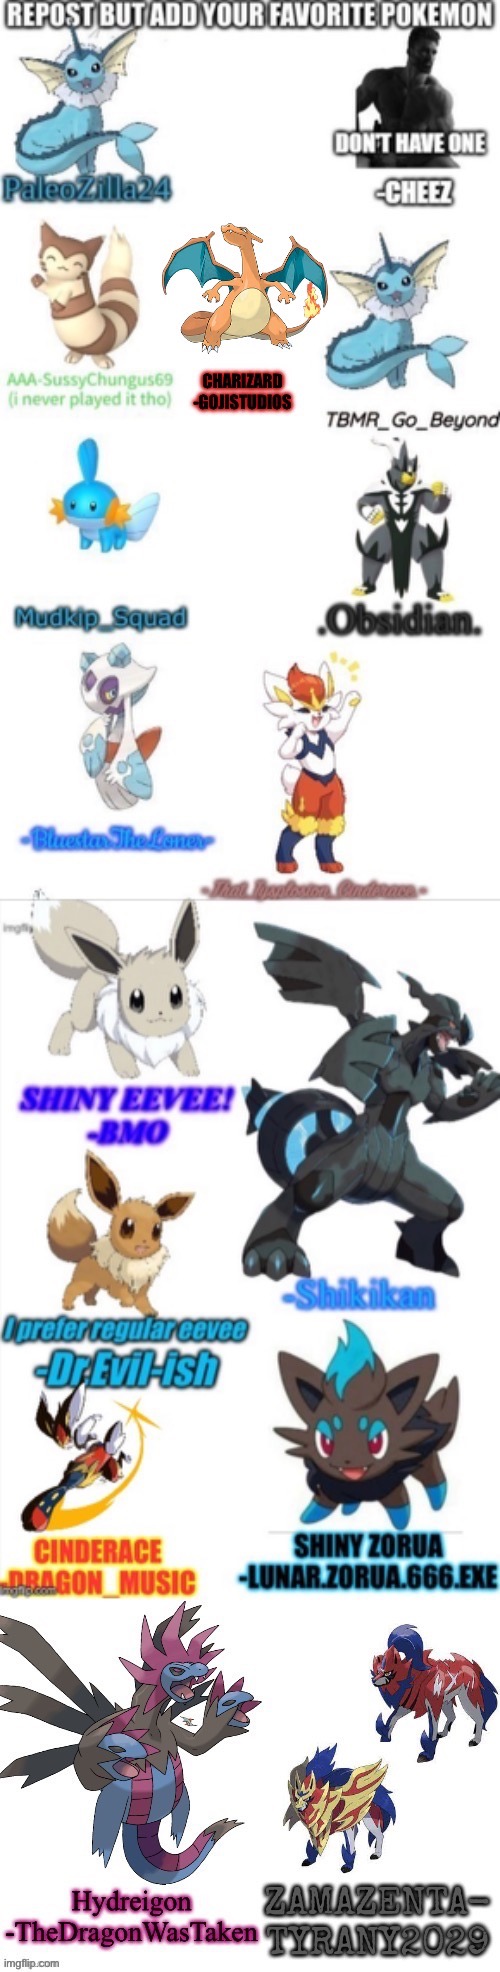 There’s barely any room now | image tagged in pokemon,repost | made w/ Imgflip meme maker